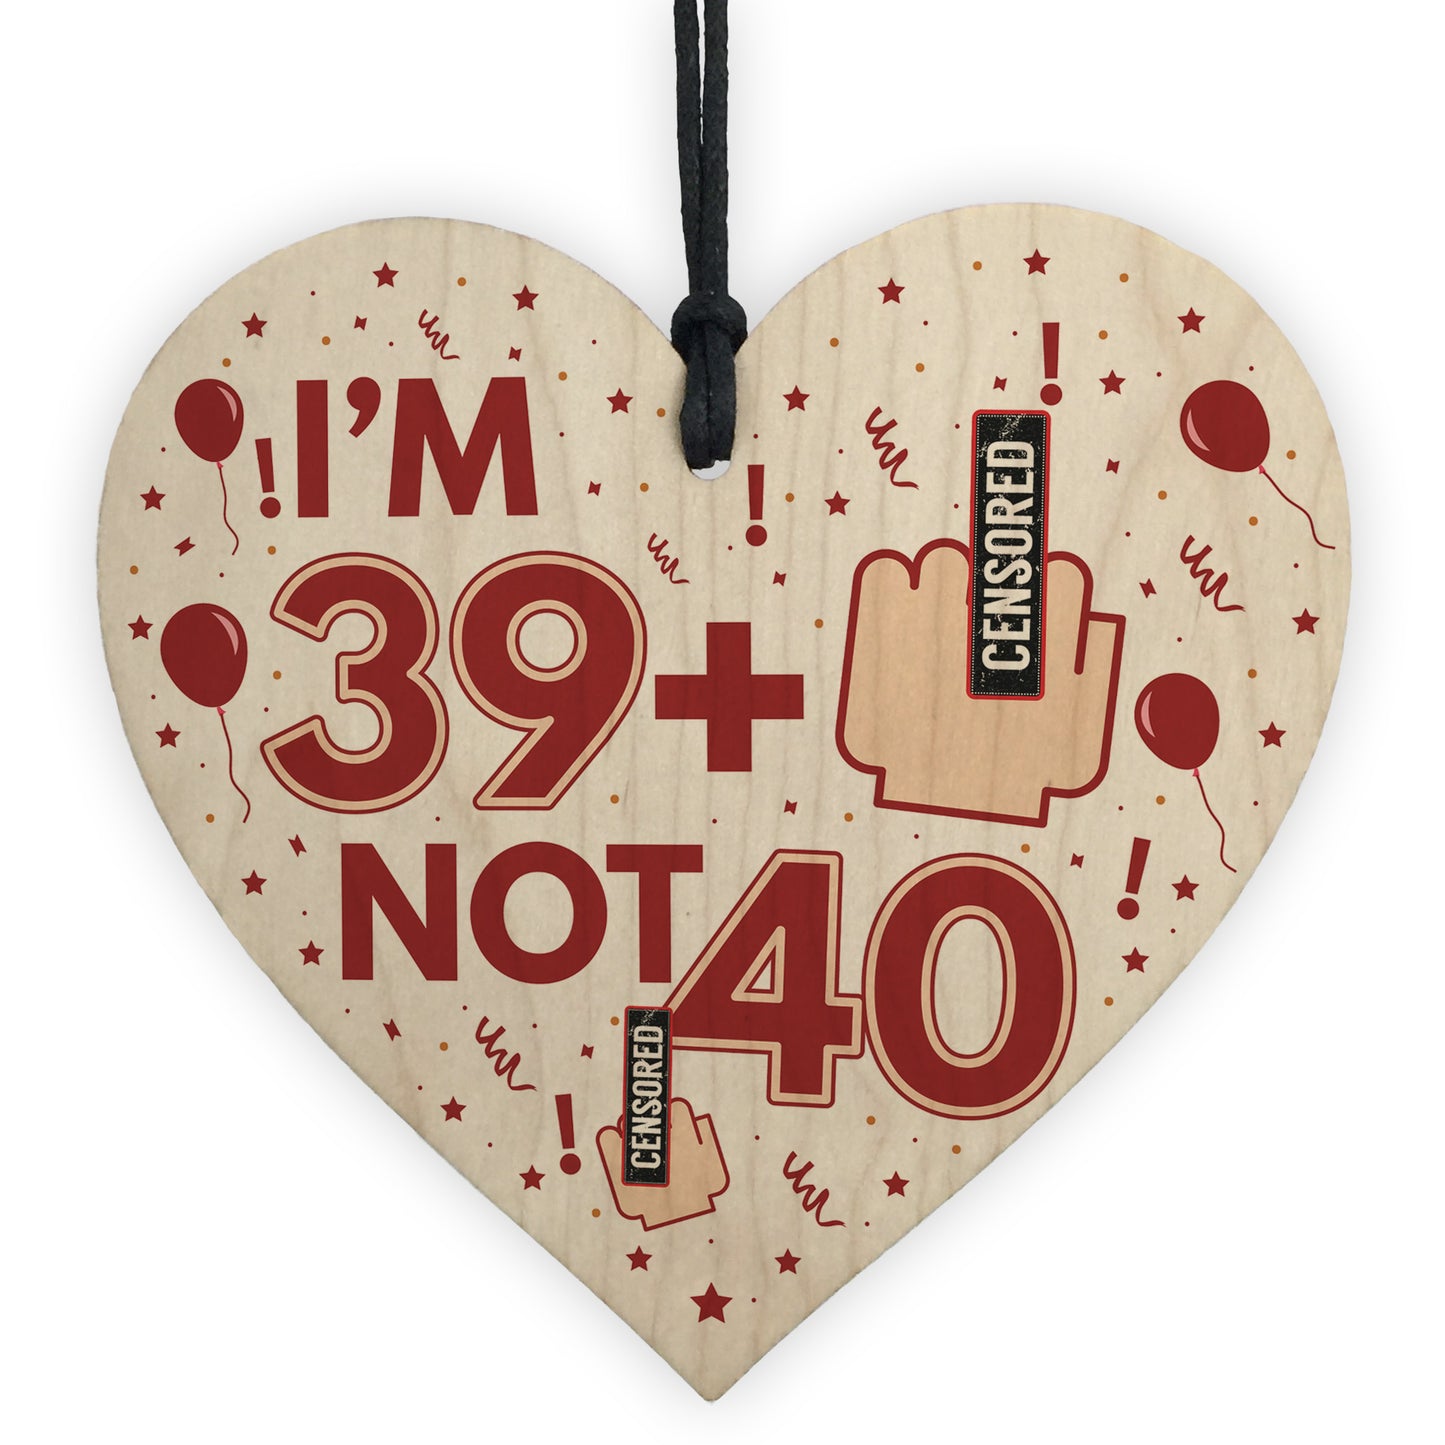 Rude 40th Birthday Decoration Wooden Heart Funny Novelty Gift